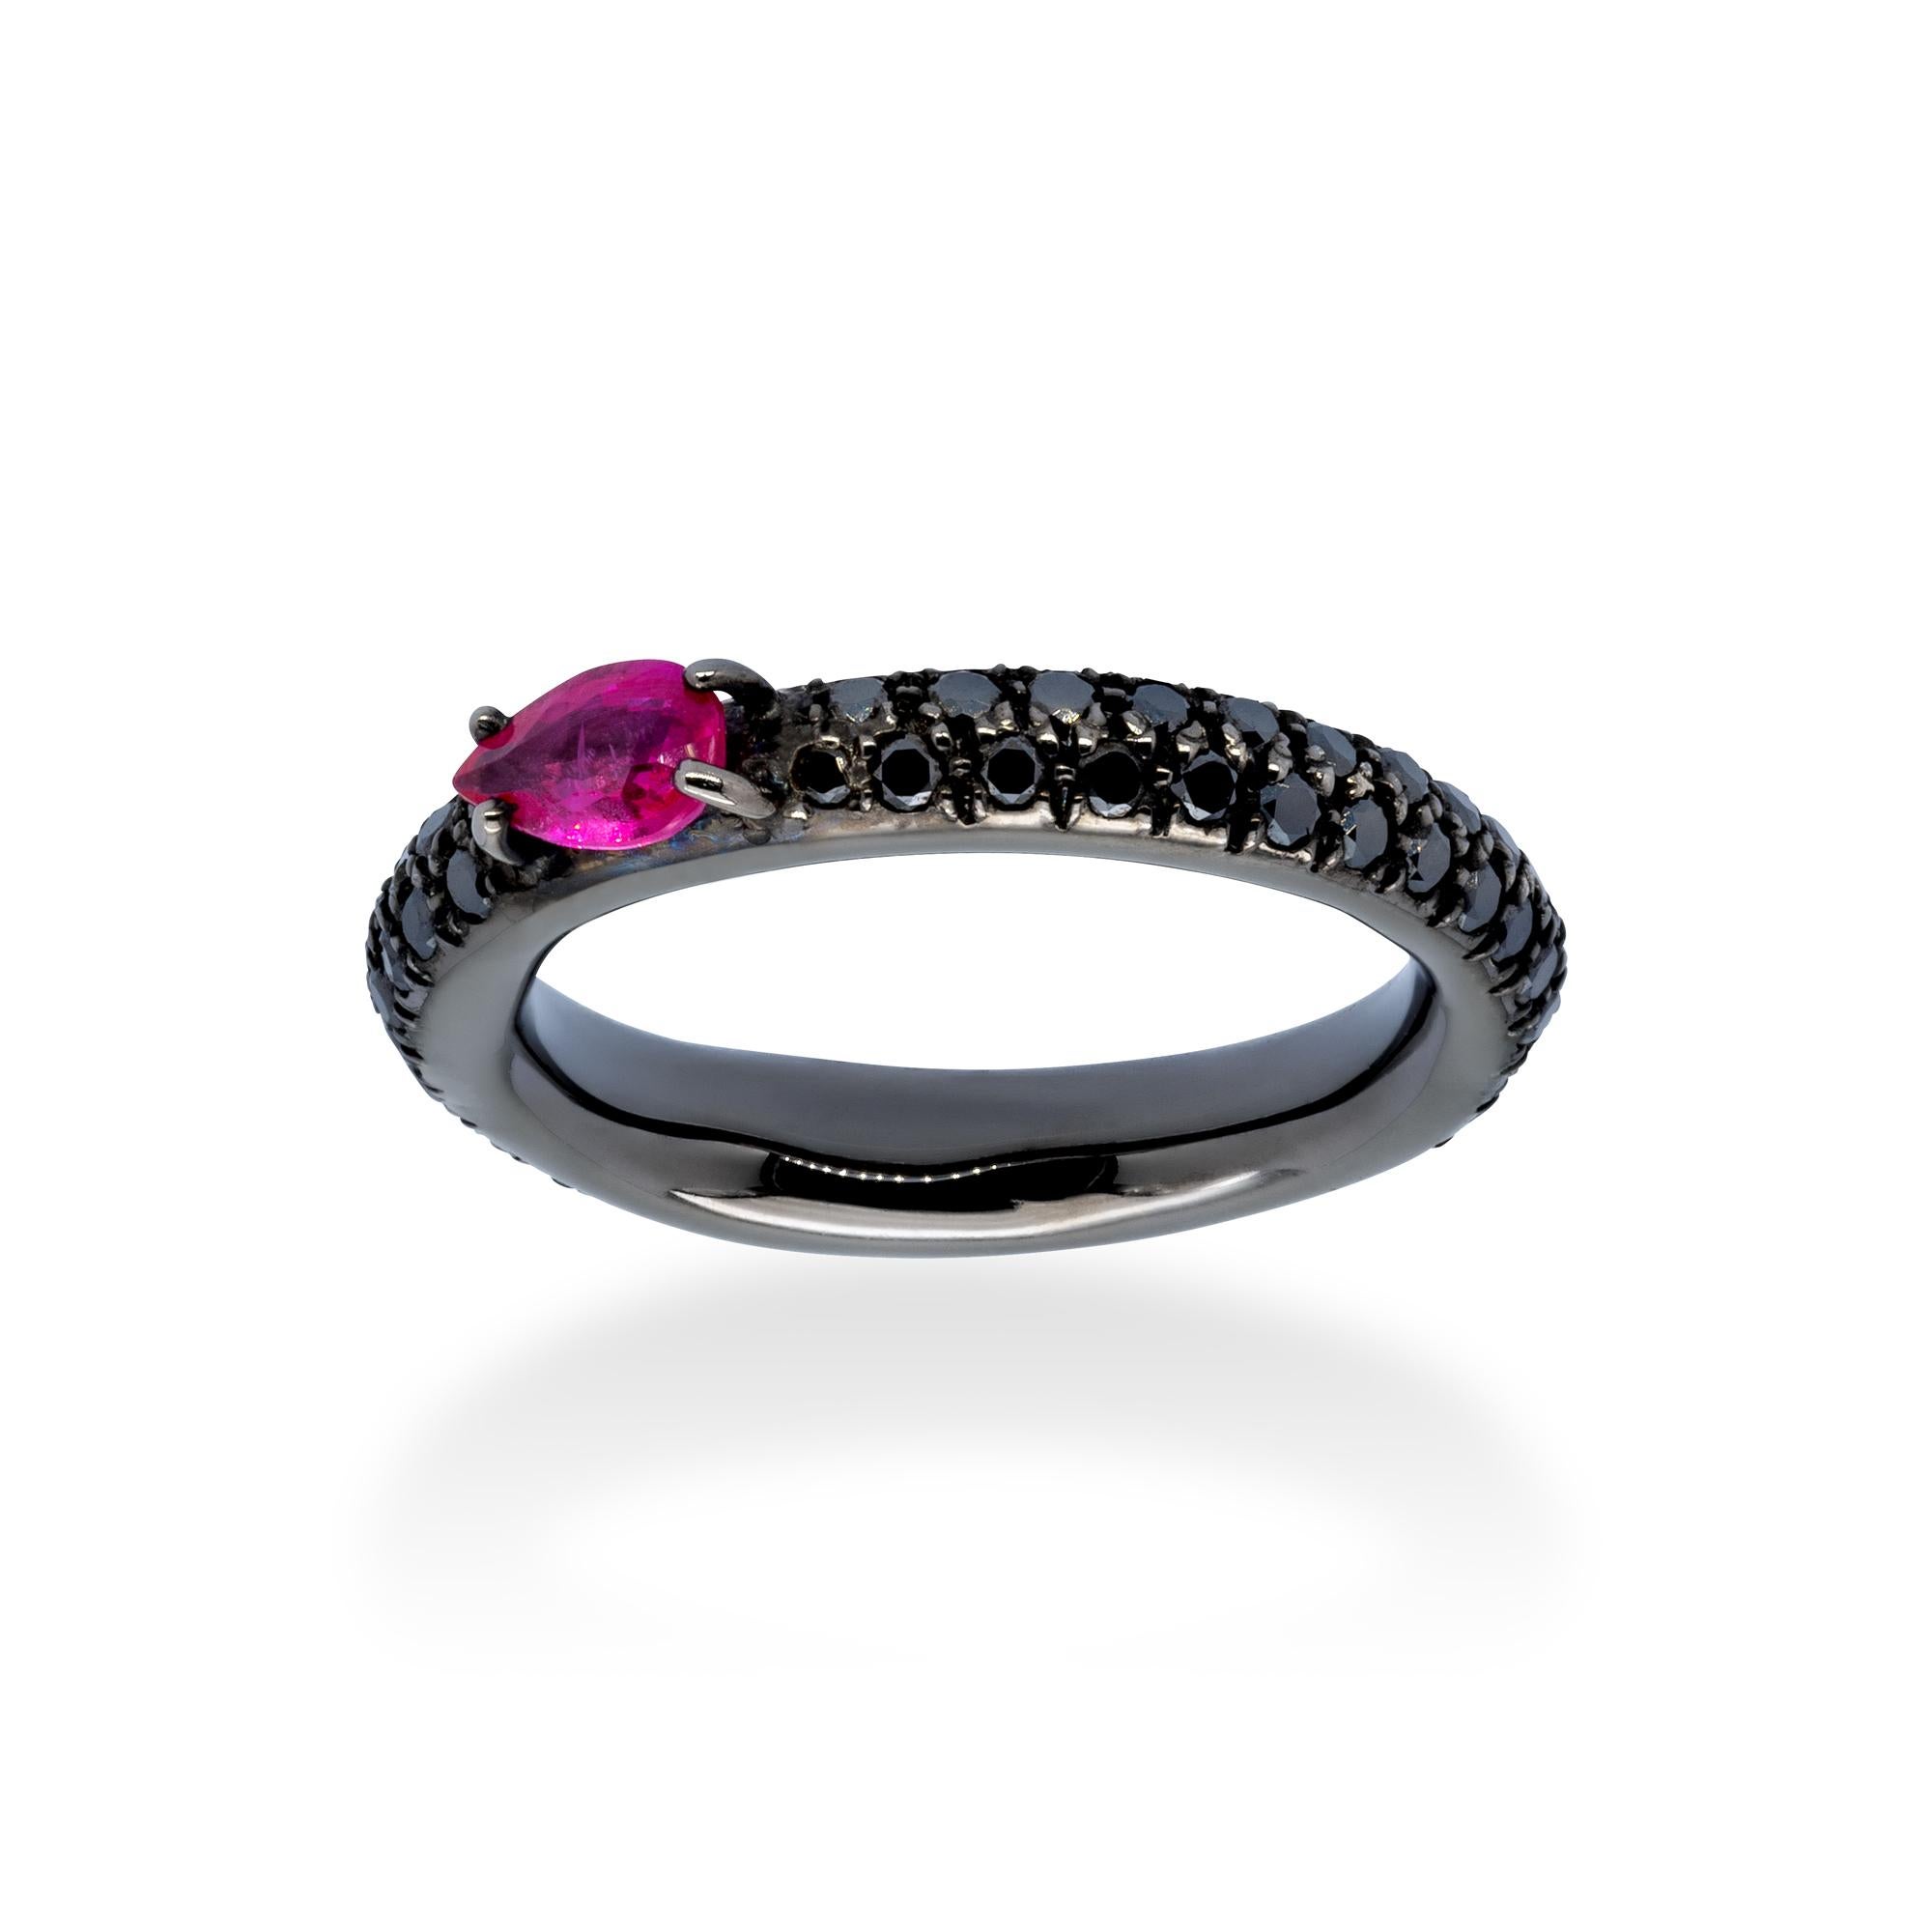 A Ring from d'Avossa Rainbow Collection in black 18 kt gold with a pavé of 0.85 cts of black diamonds and a central pear shape ruby of 0.46 cts  

This Ring has been designed to be worn alone, or together with one or more rings of the same